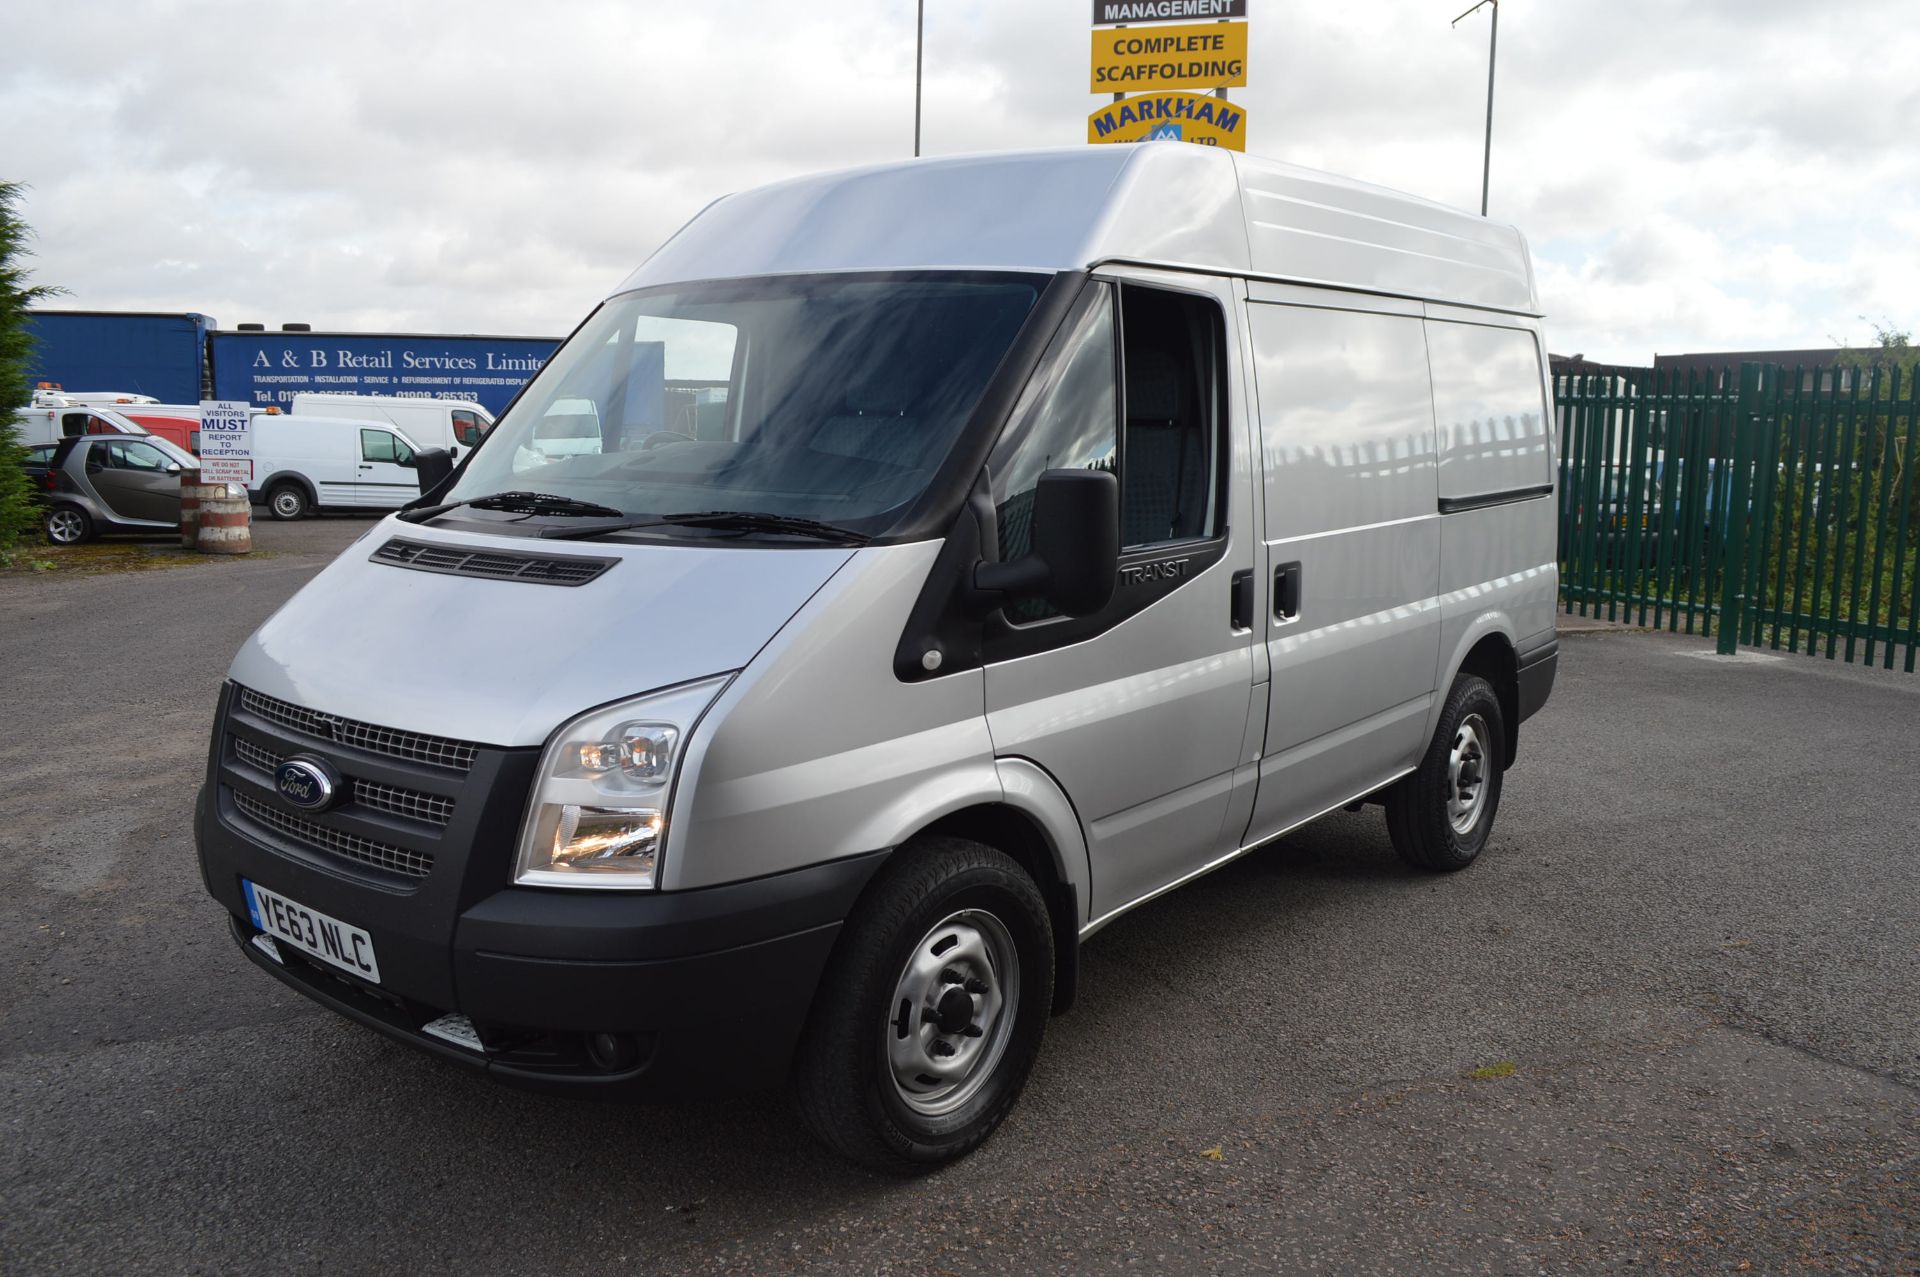 2013/63 REG FORD TRANSIT 125 T330 FWD - 1 OWNER FROM NEW, AIR CON, HEATED WINDSCREEN! *NO VAT* - Image 3 of 25